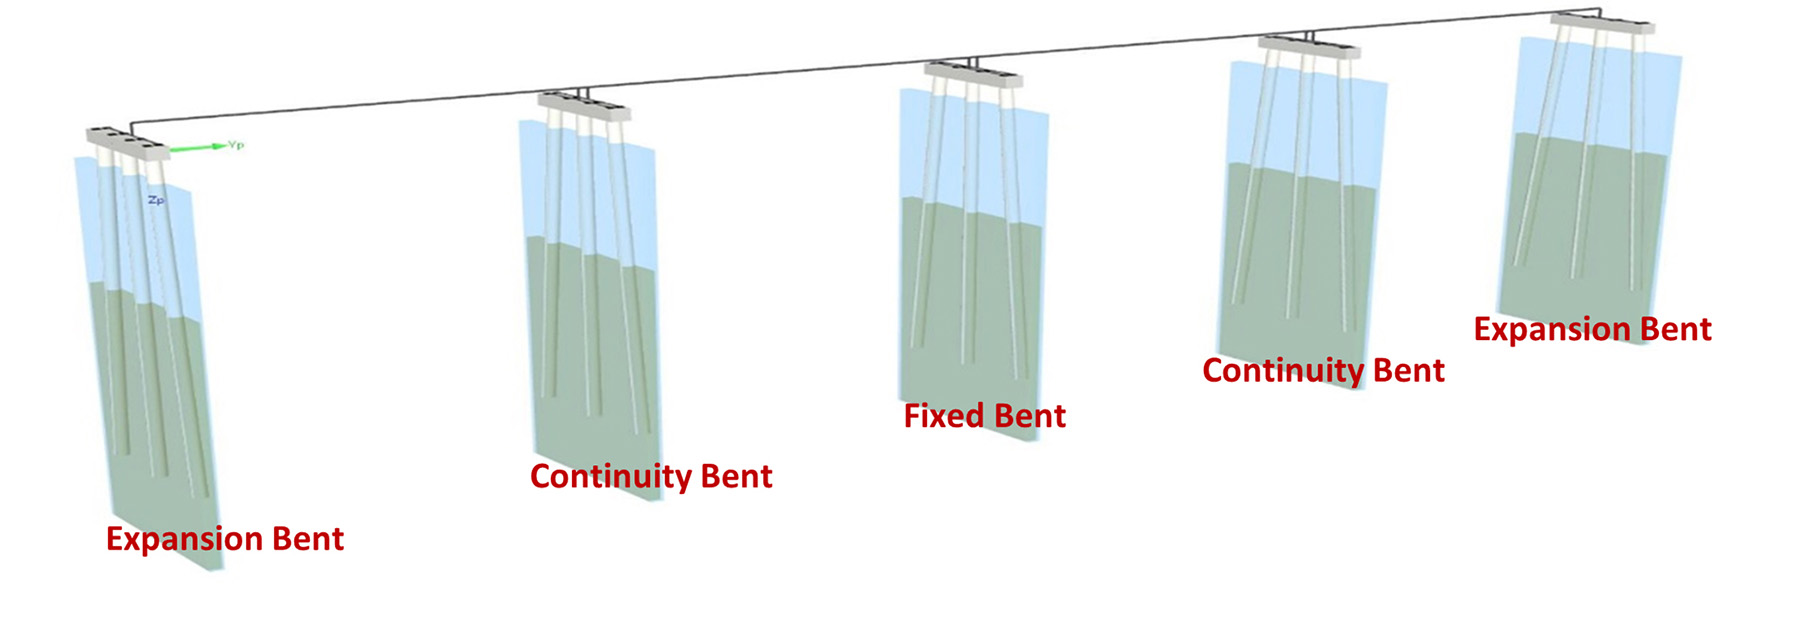 Image depicts the types of bents used in the Rodanthe Bridge: expansion, continuity, and fixed. 